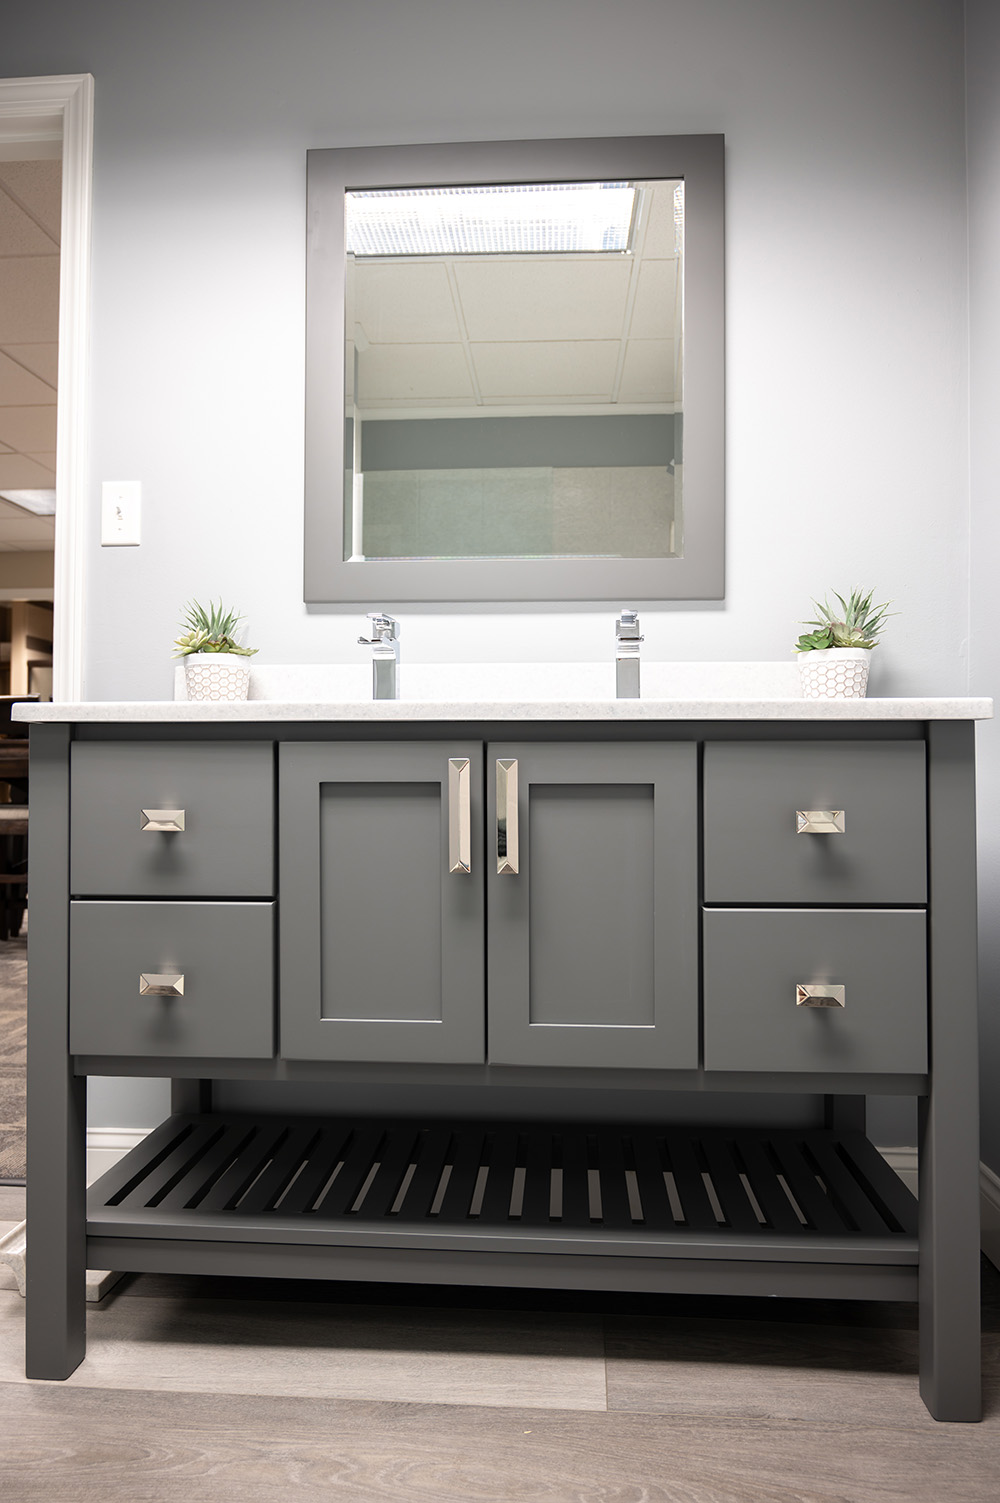 4 Reasons to Upgrade Your Vanity from a Single to a Double